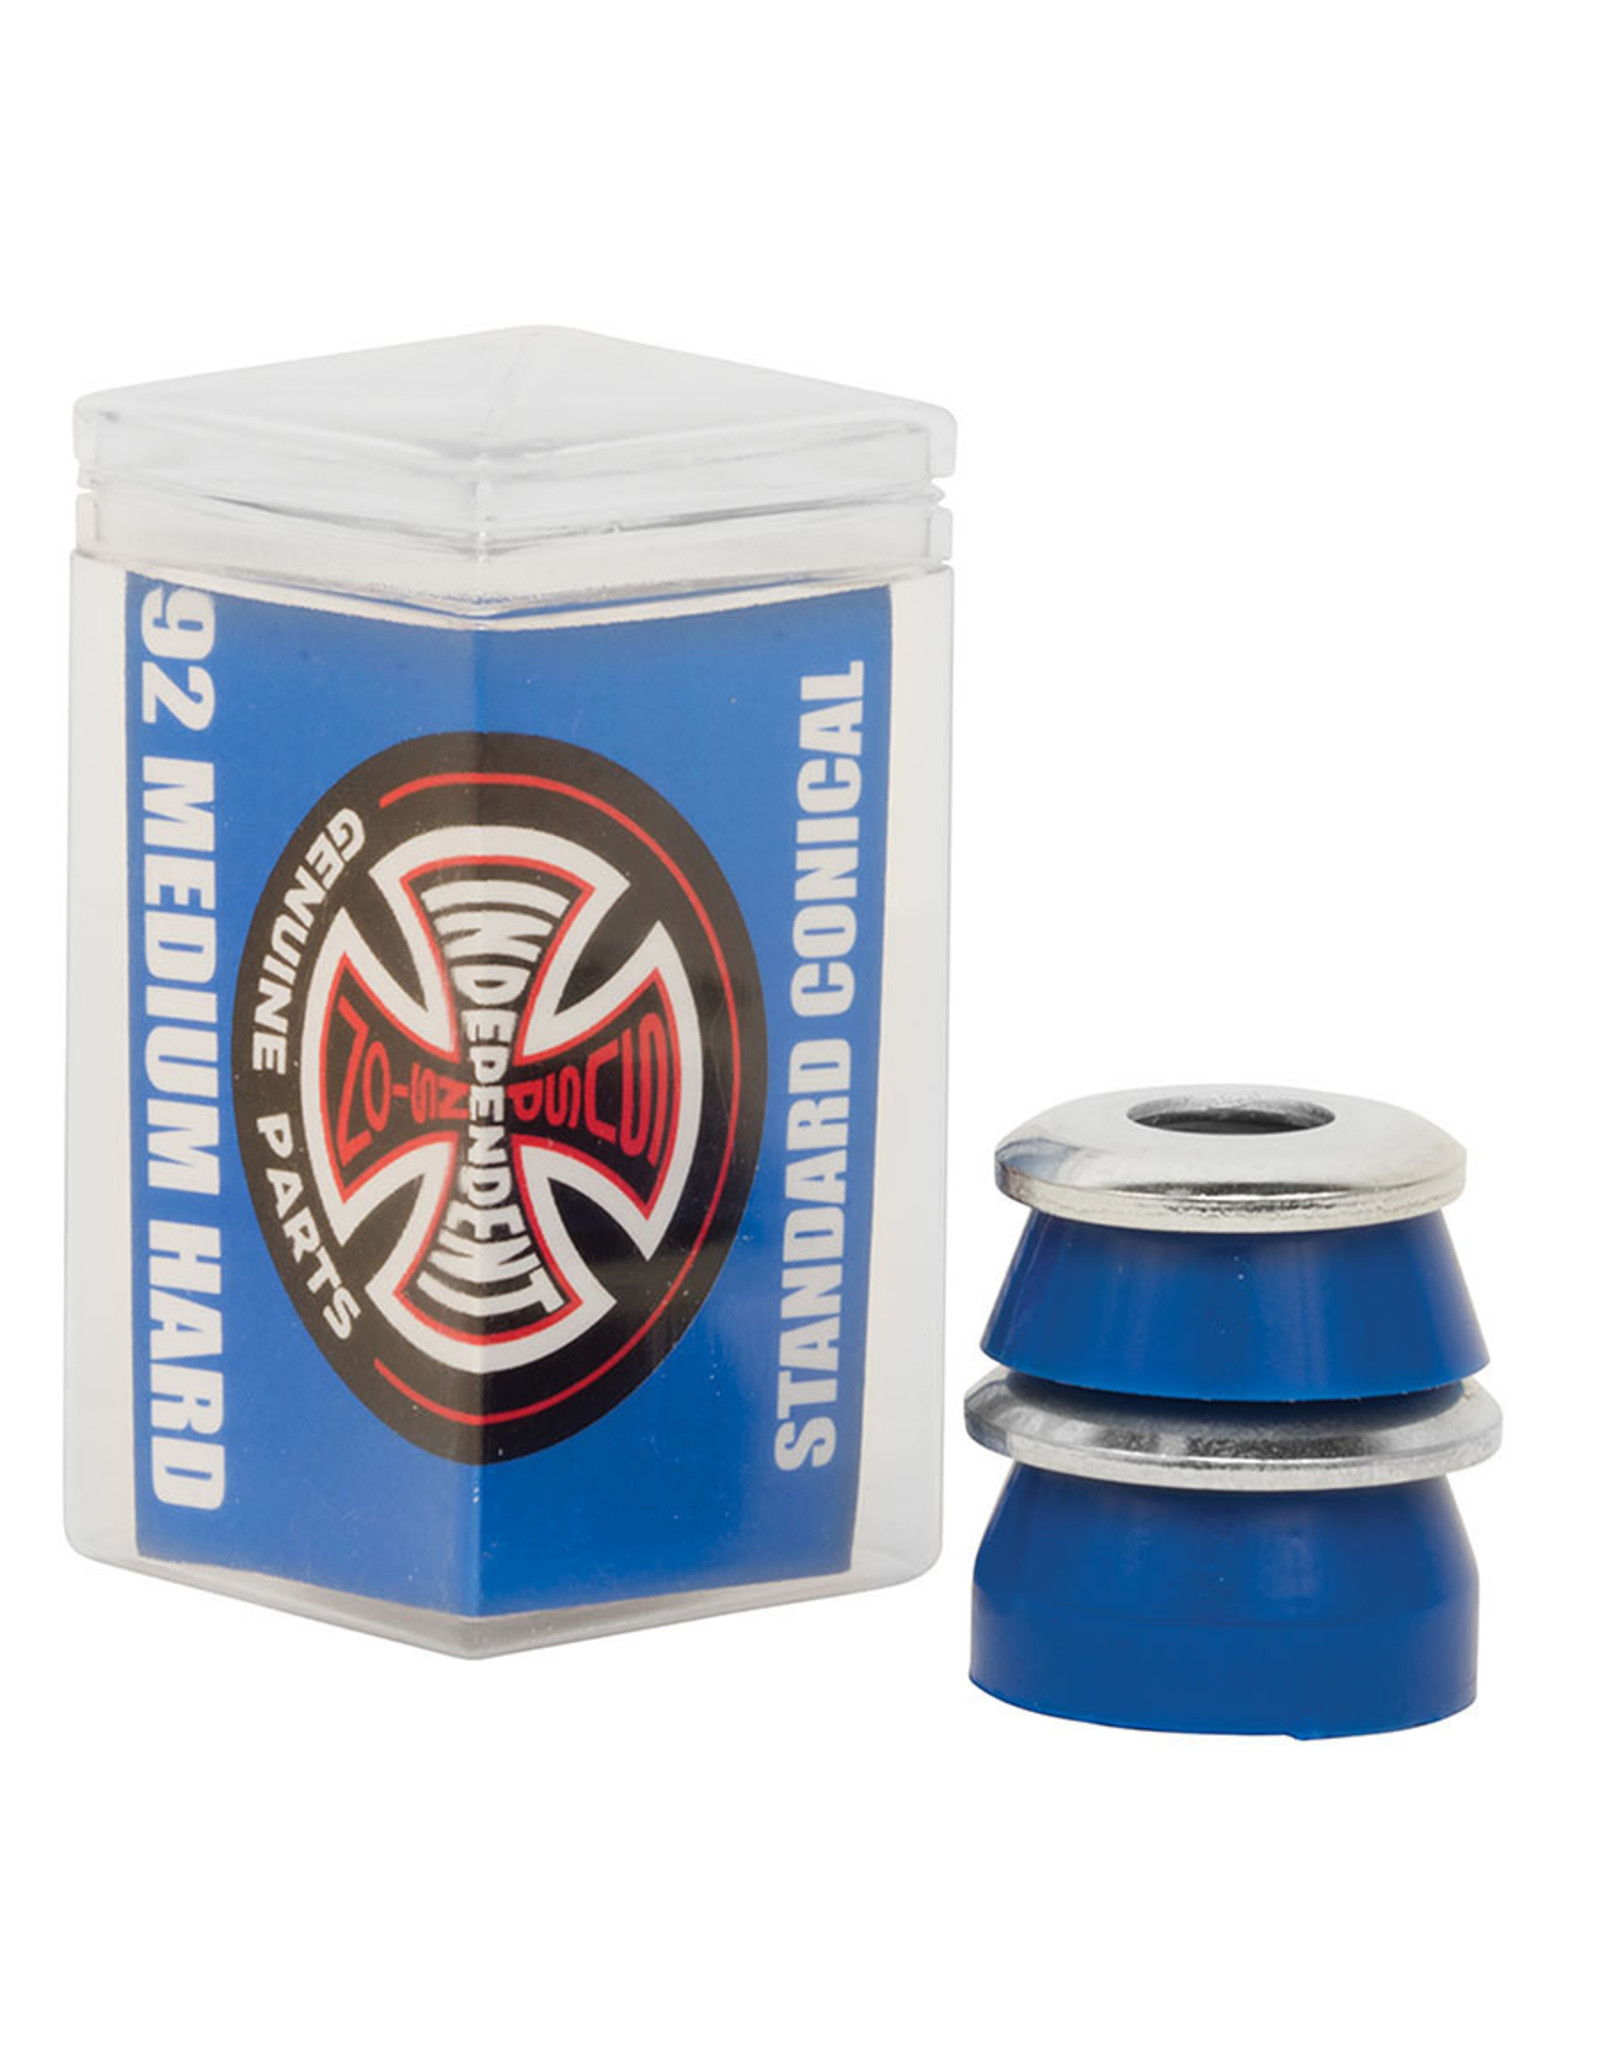 Independent Independent Bushings Standard Conical Medium Hard Blue (92a)